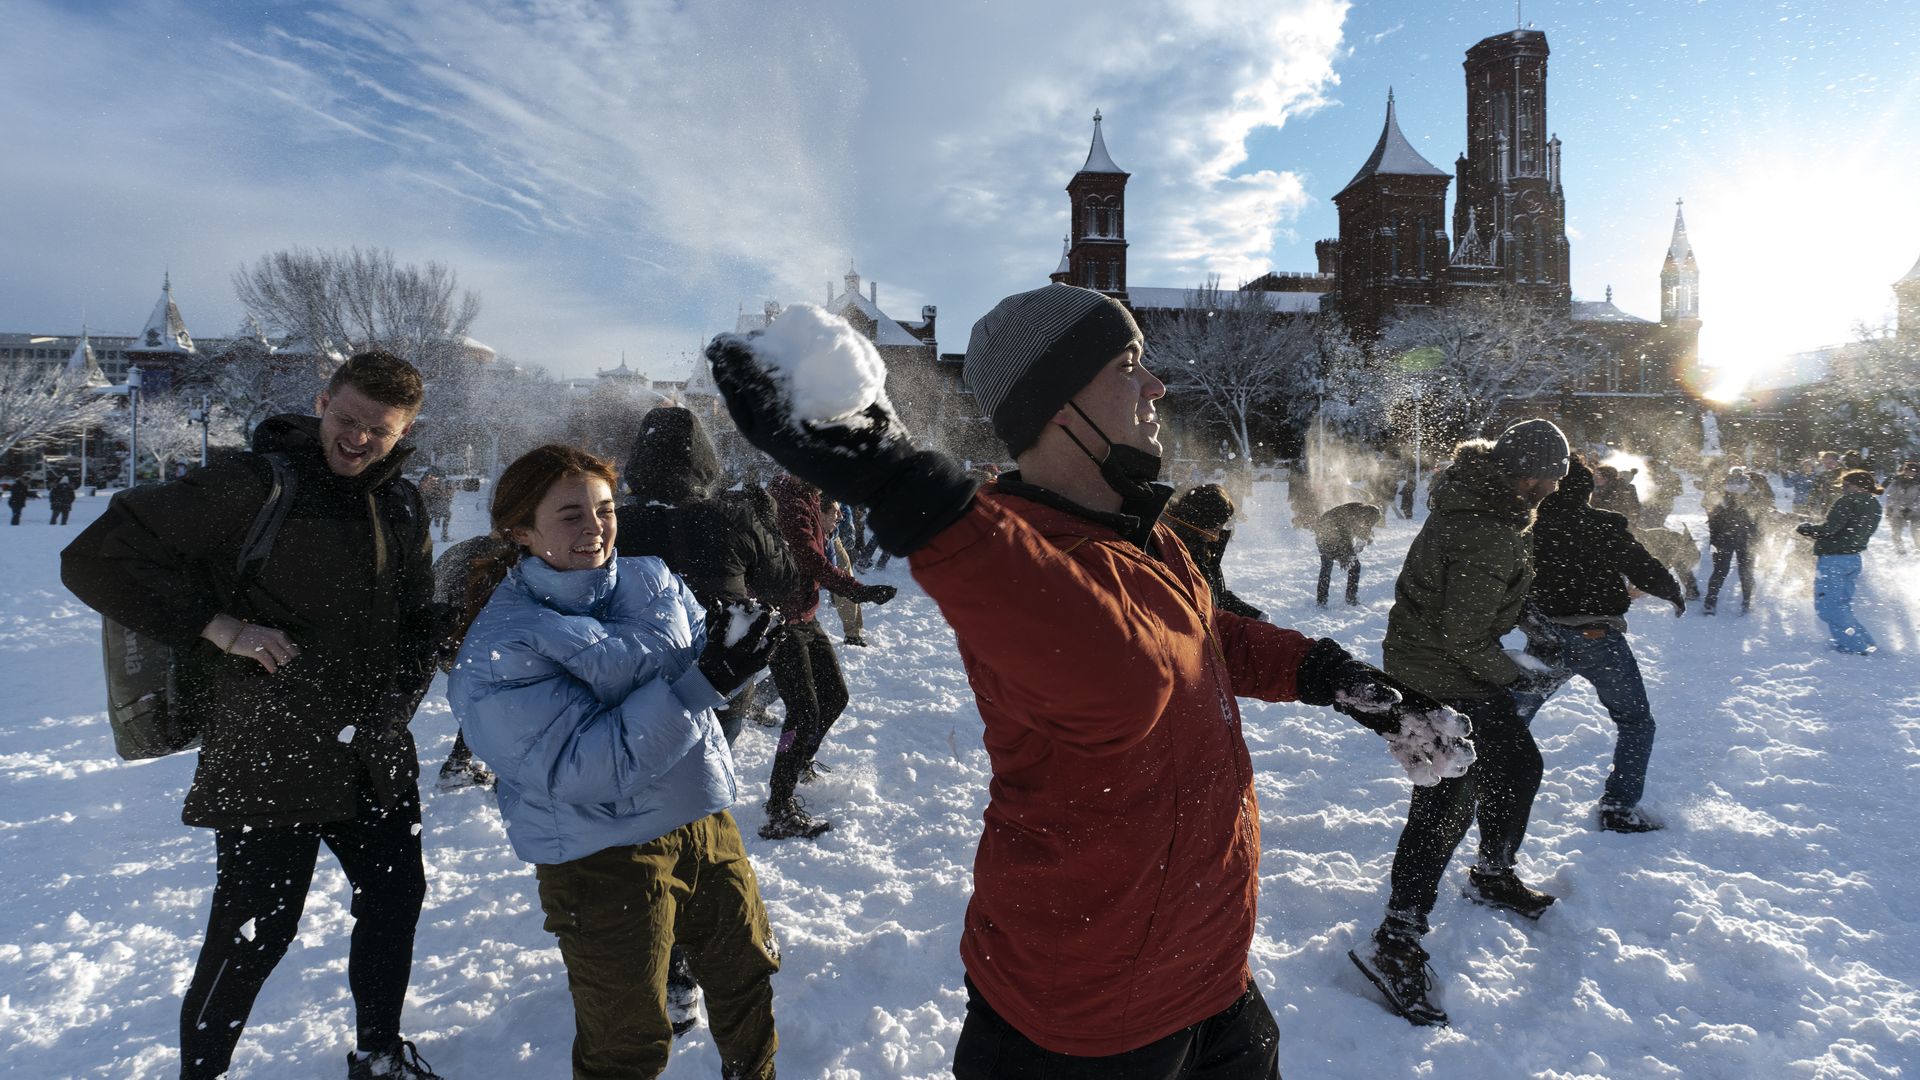 A man gets ready to throw a snowball at a snowball fight on the National Mall